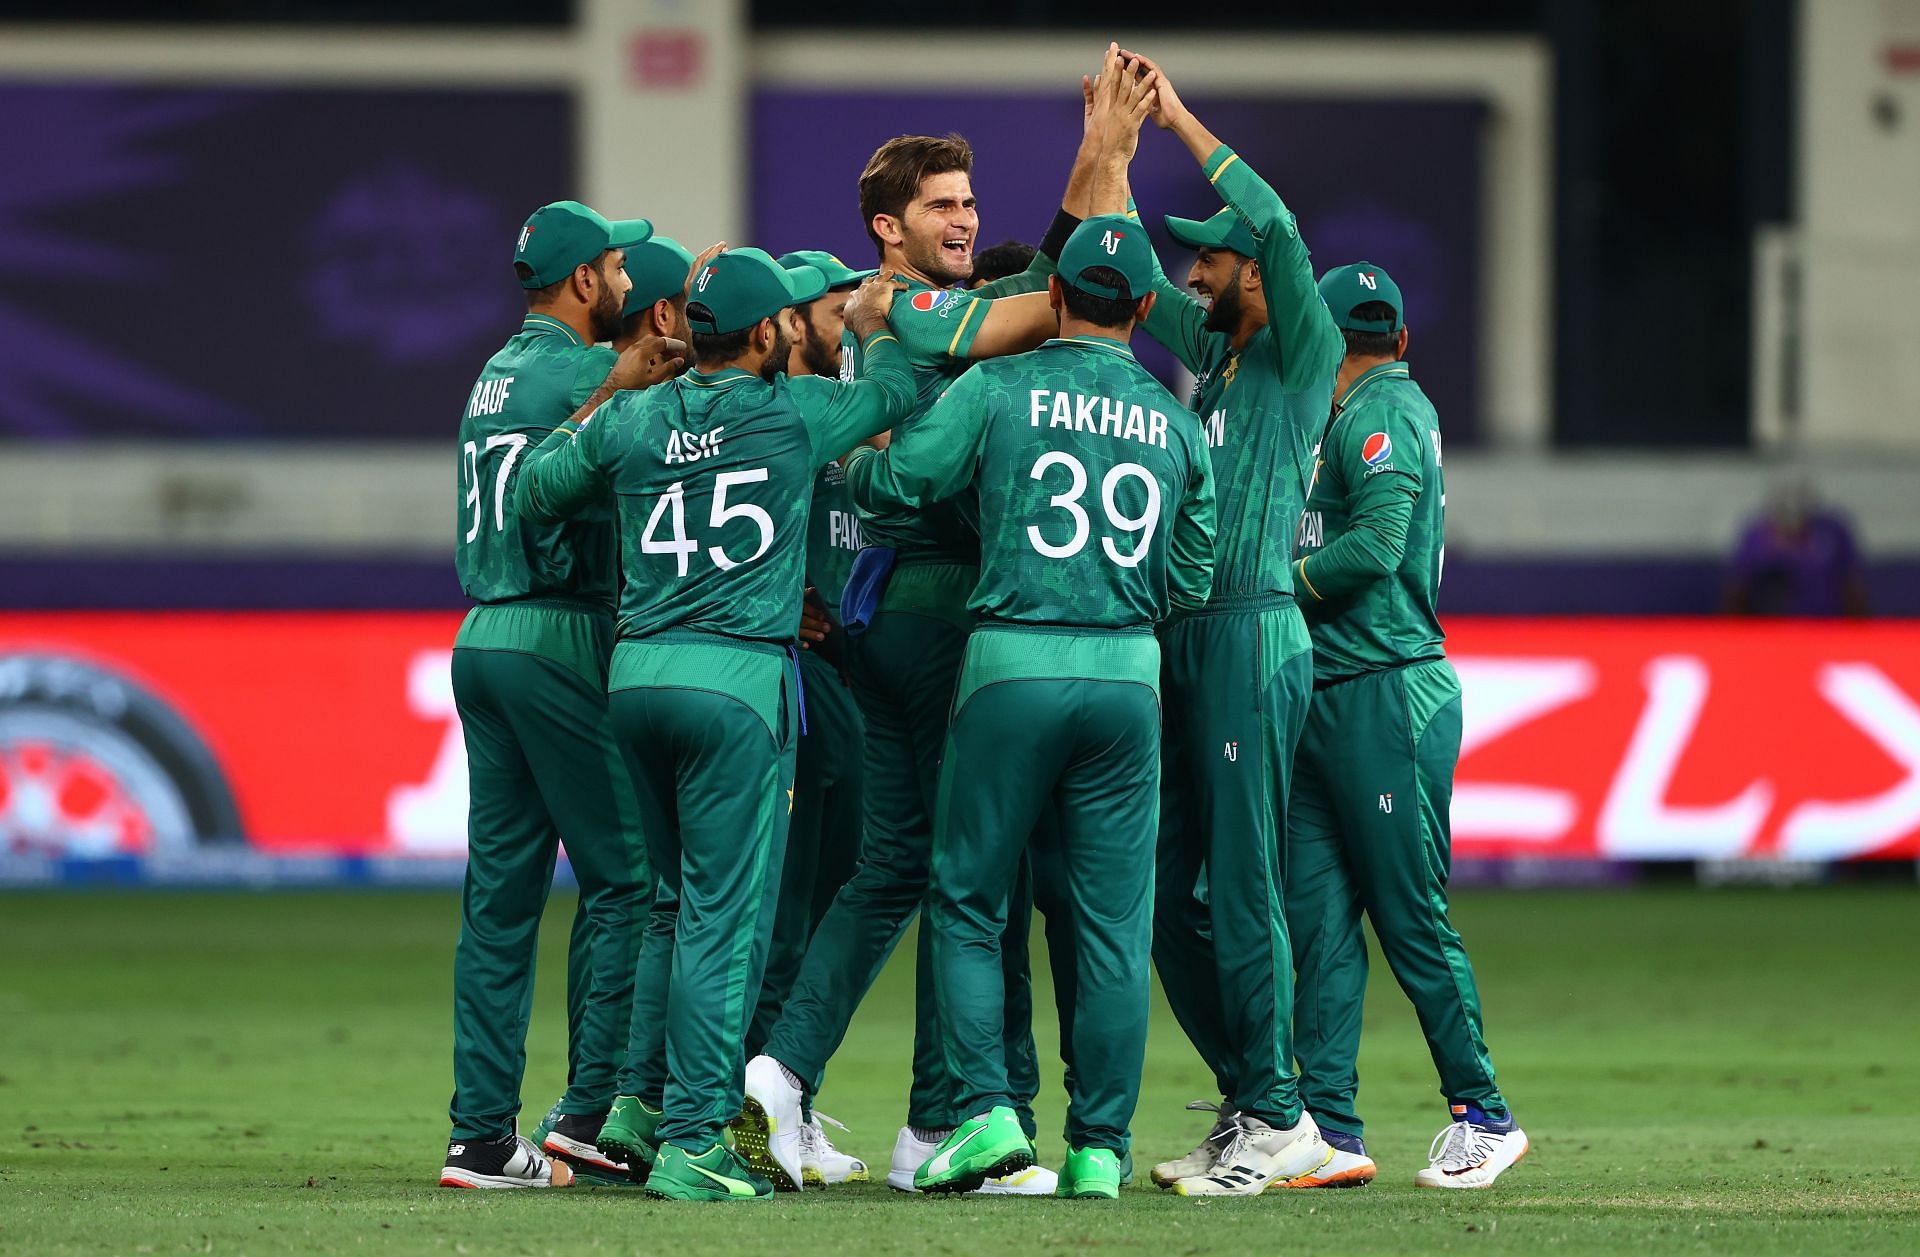 Shaheen Afridi is one of the best bowlers in world cricket at the moment. (Image: Getty)